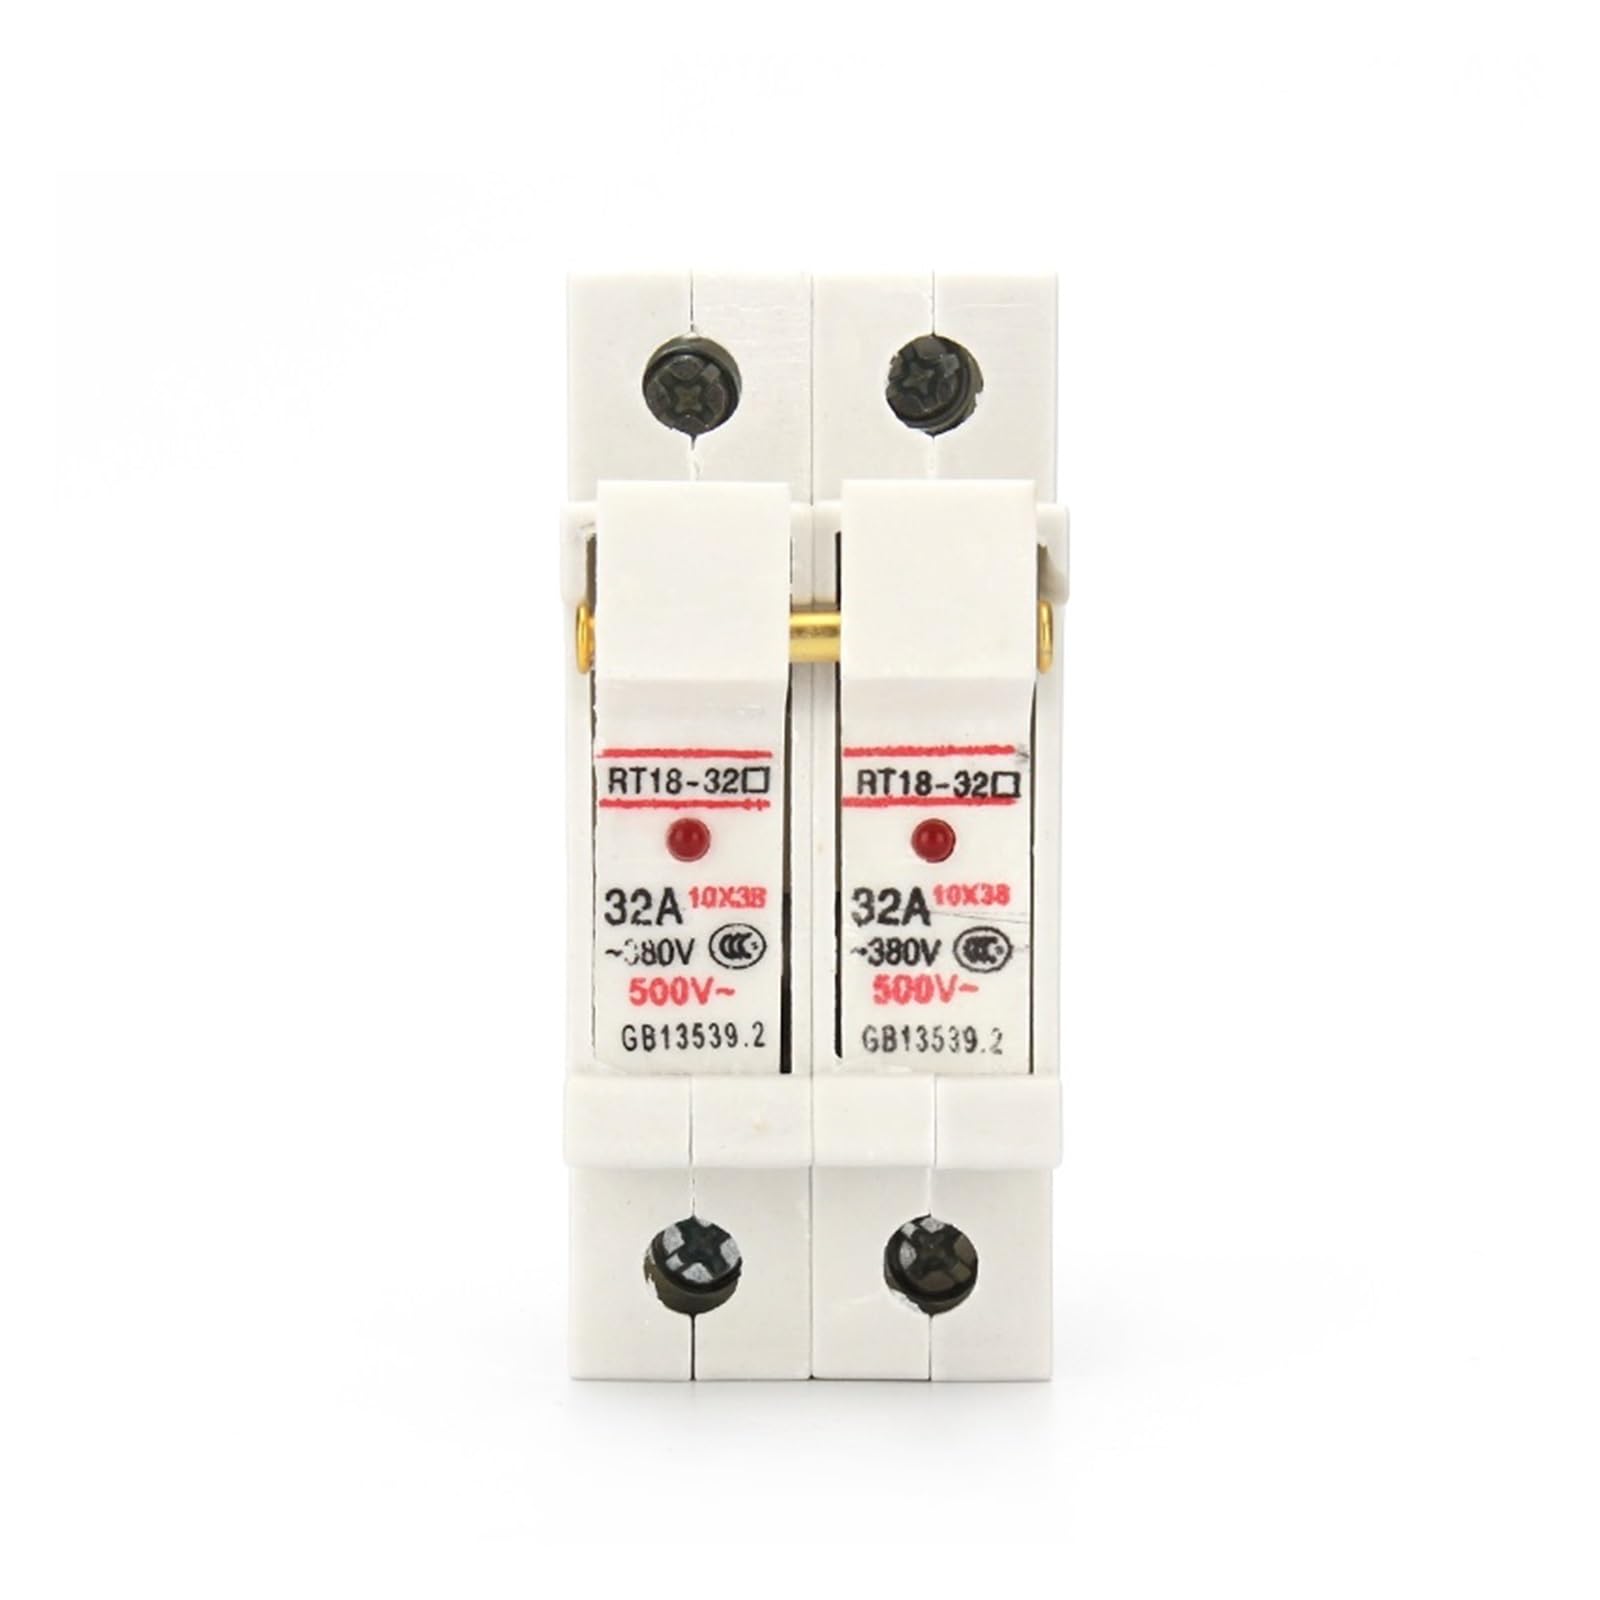 1P 2P 3P 4P RT18-32X AC ~380V Copper Fuse Holder 500V 10x38mm DIN rail mounting Fuse holder bottom adapter with Fuse RUAJOGYNVM(4A,2P) von RUAJOGYNVM